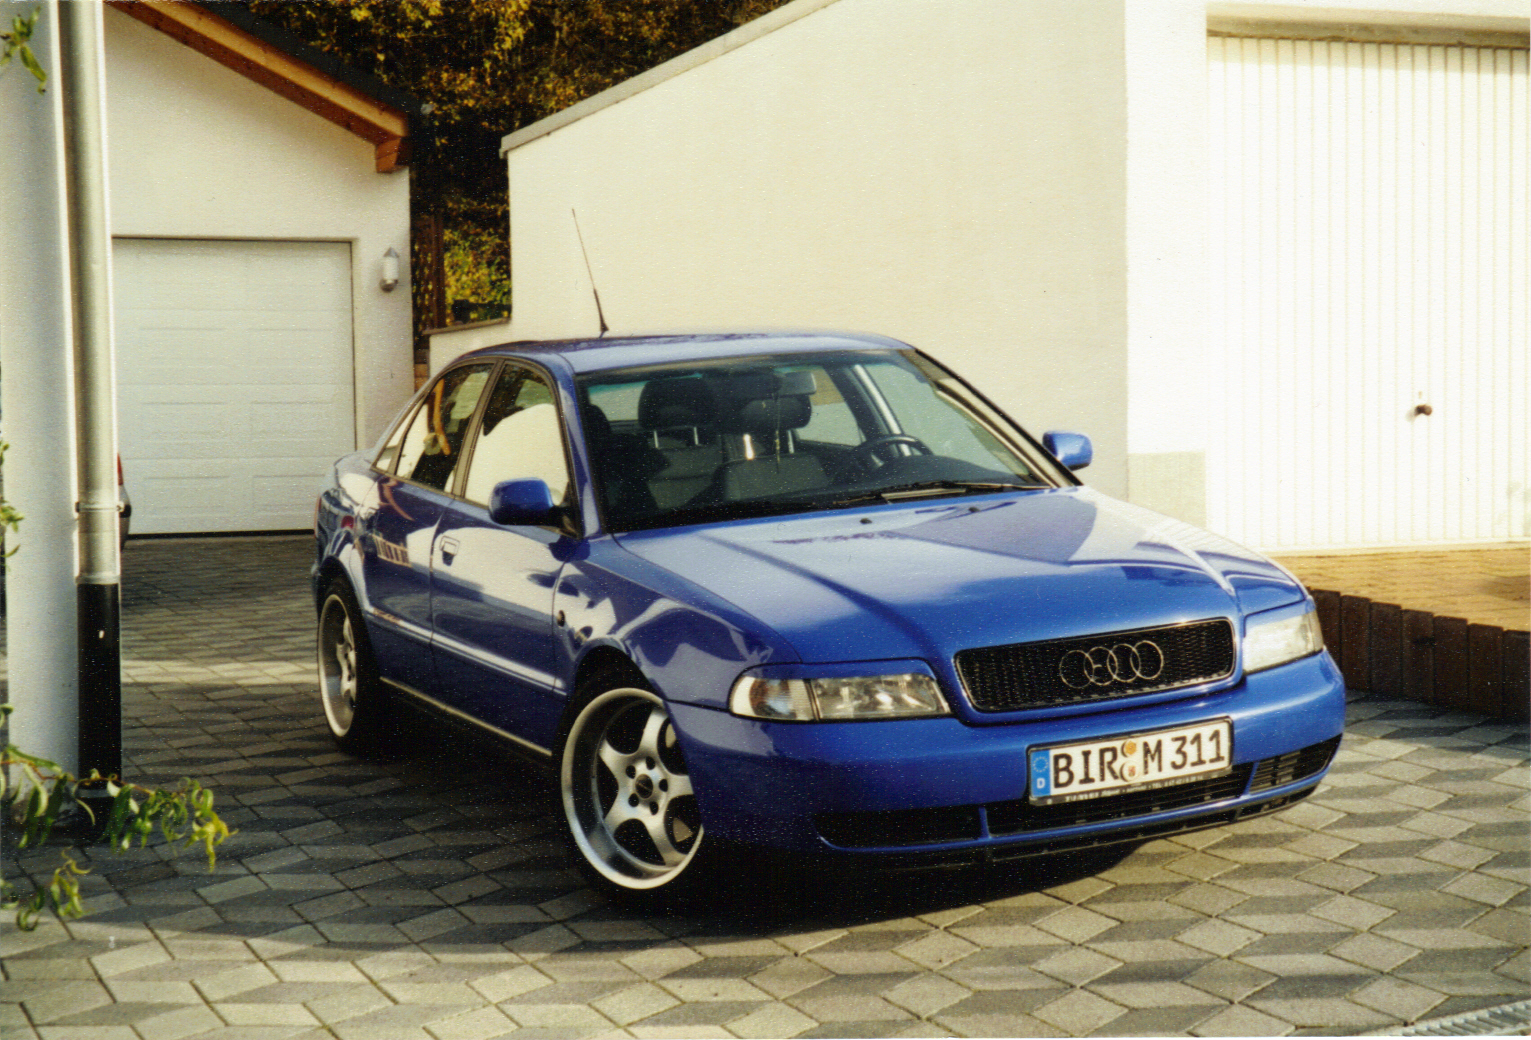 Ob Audi 80 B2, Audi 80 B3 oder B4, Audi A4 B5 oder B6 bis zum Coupe